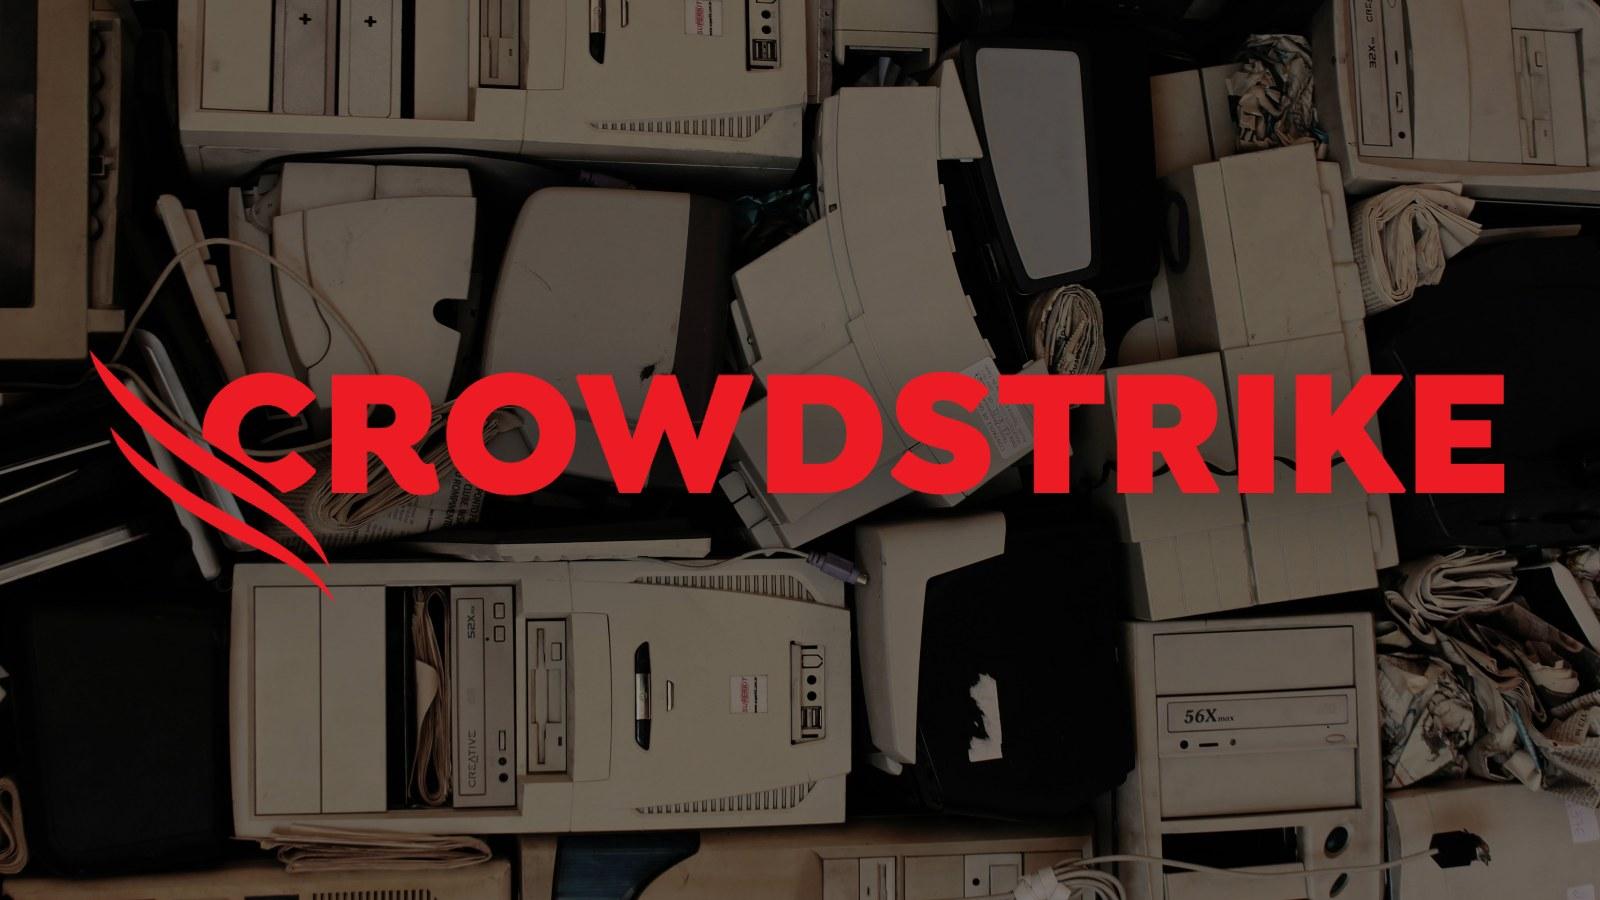 Crowdstrike red logo on faded background of broken computers